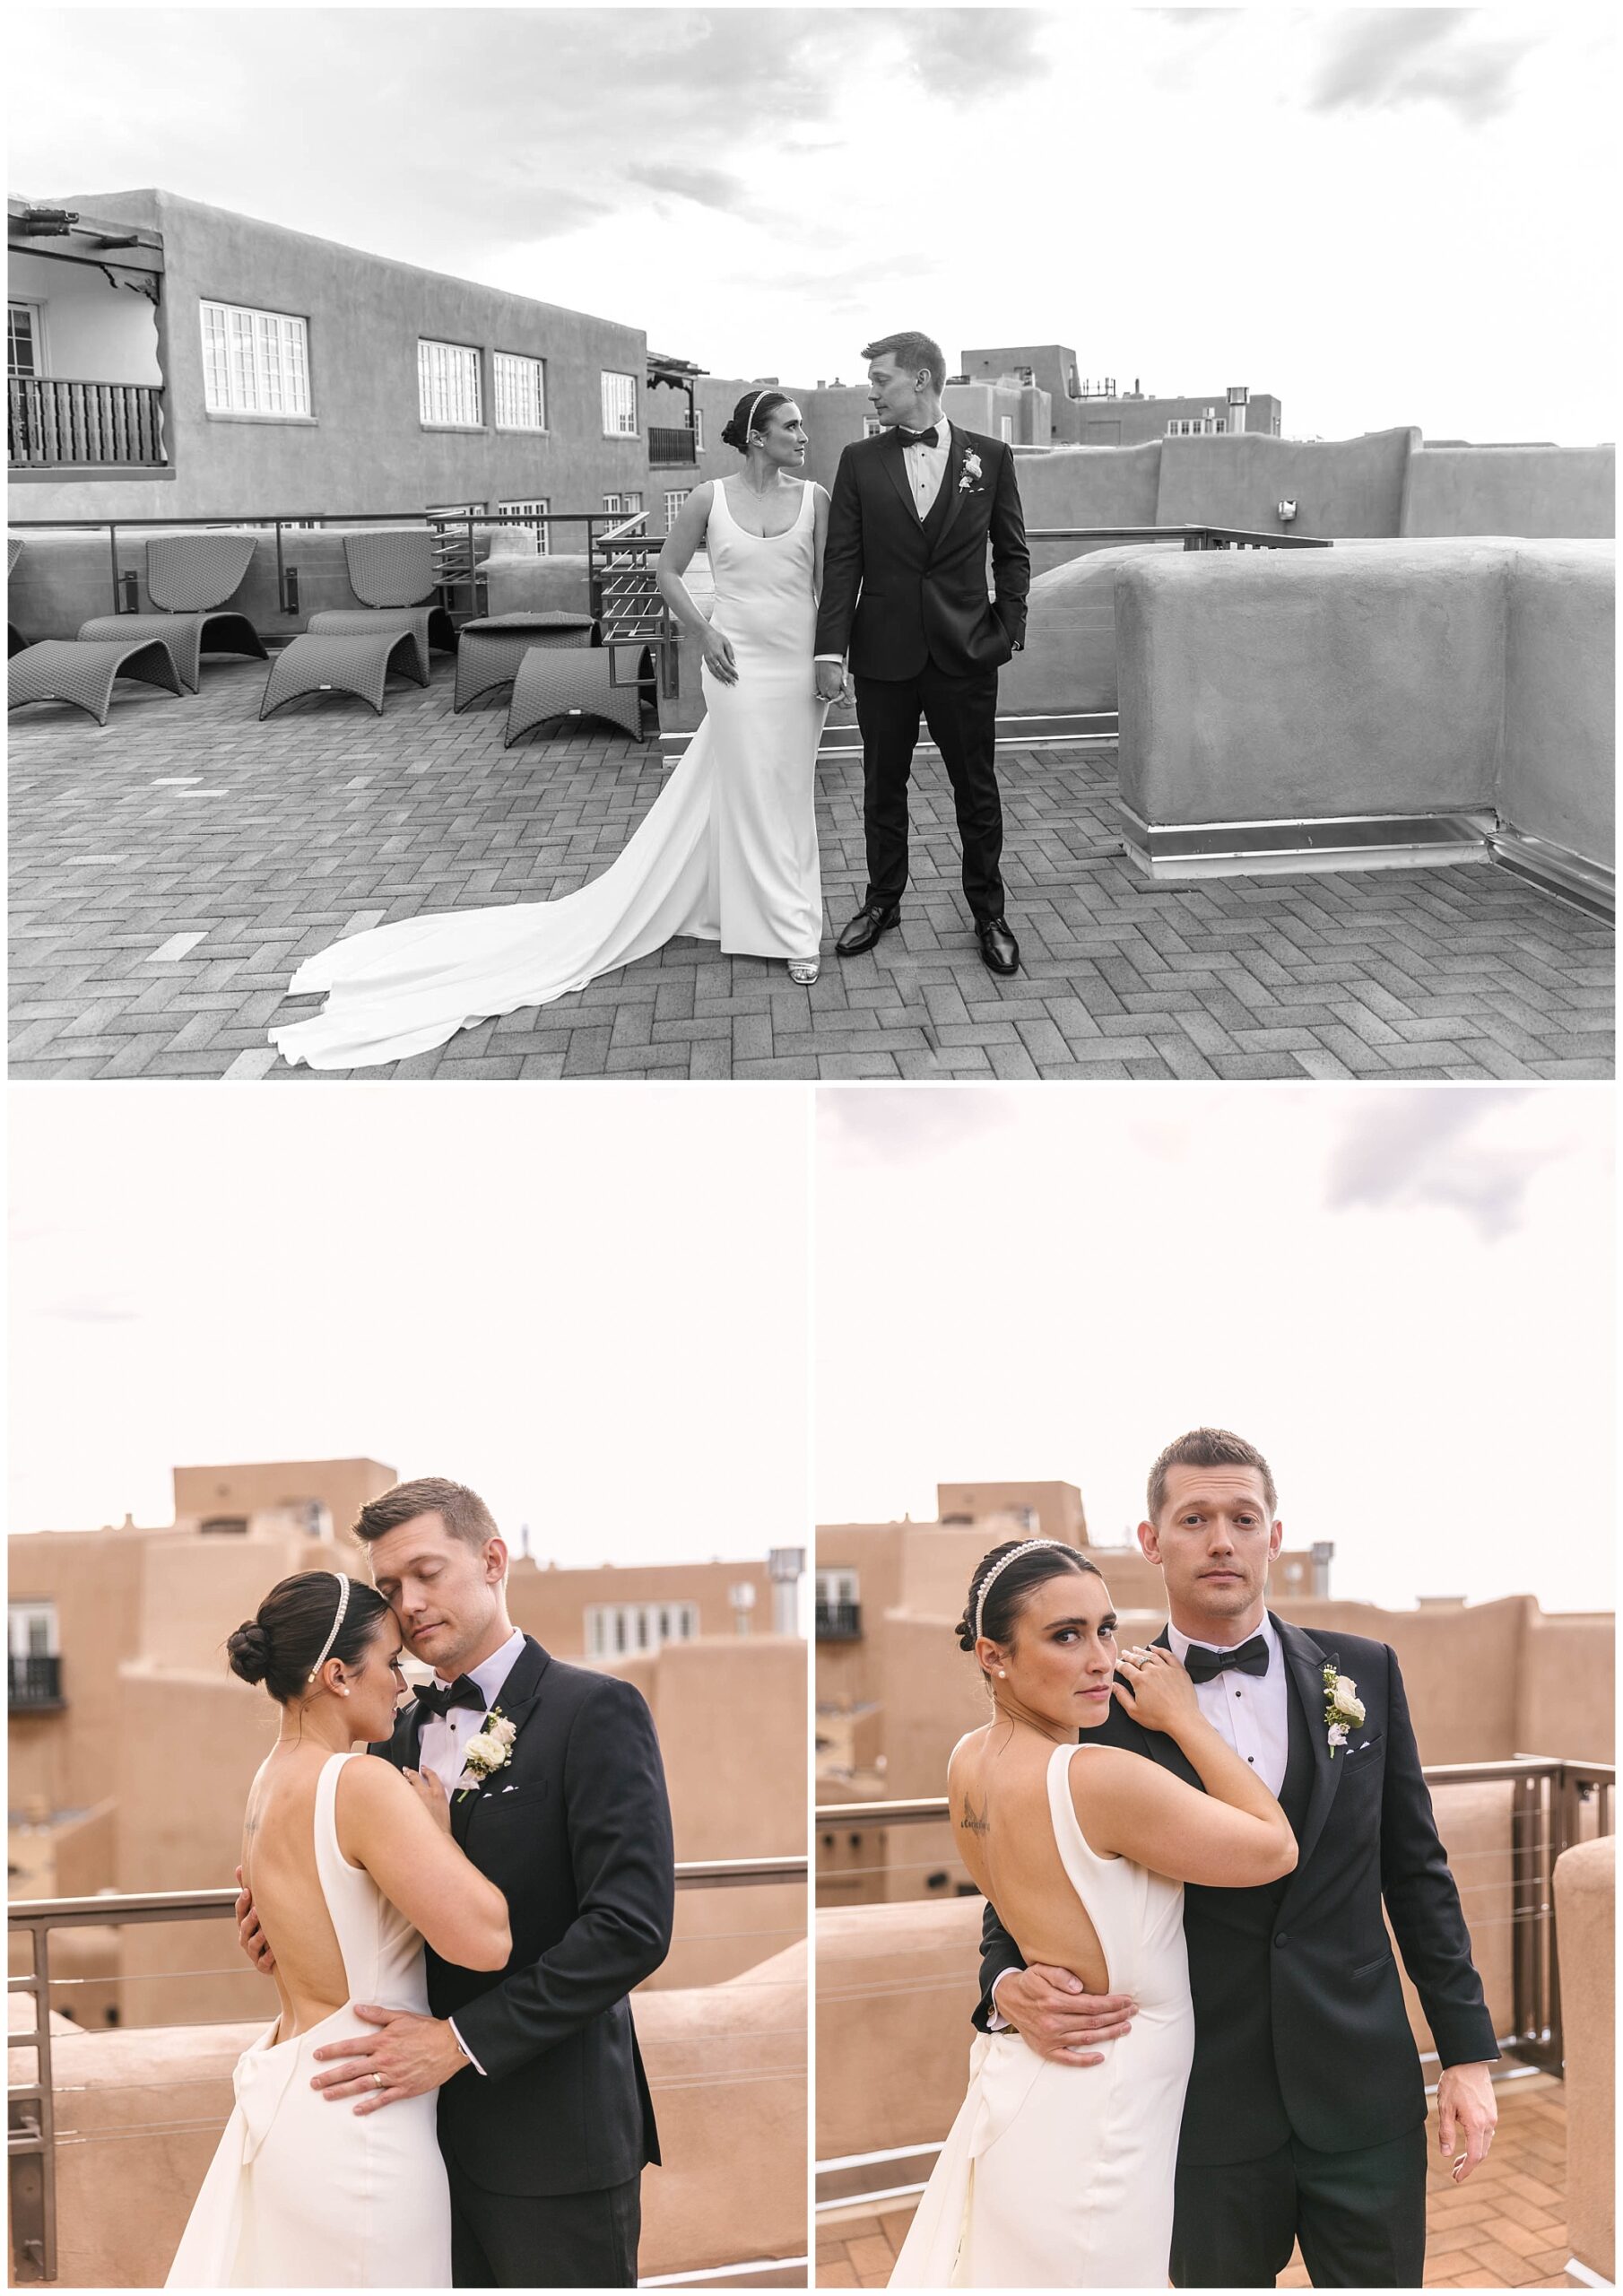 Classic and chic bride and groom portraits on adobe rooftop at La Fonda on the Plaza wedding in Santa Fe New Mexico